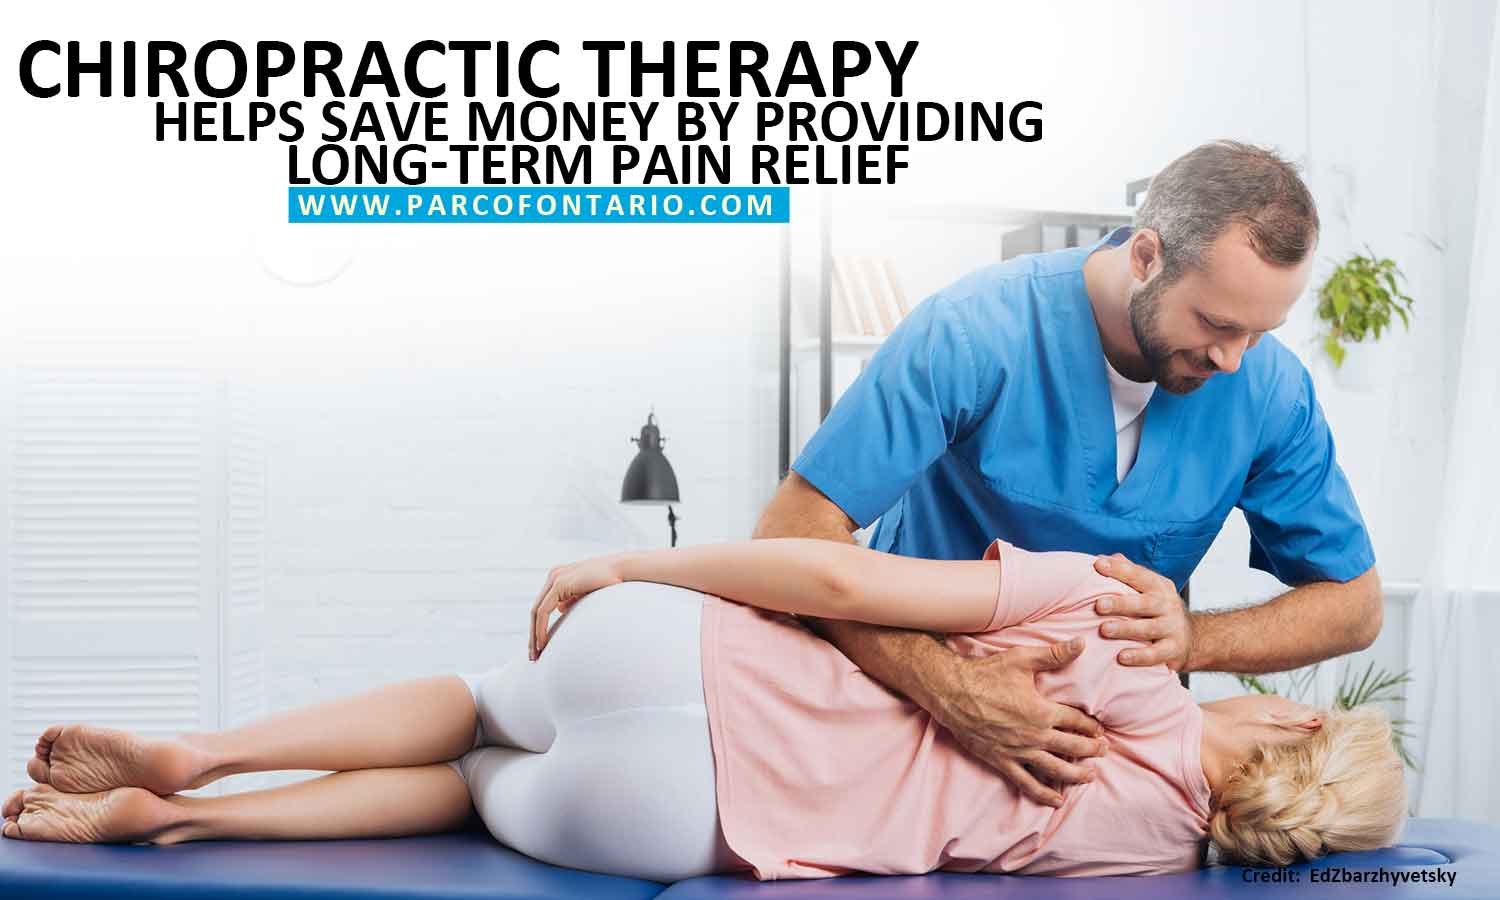 Chiropractic therapy helps save money